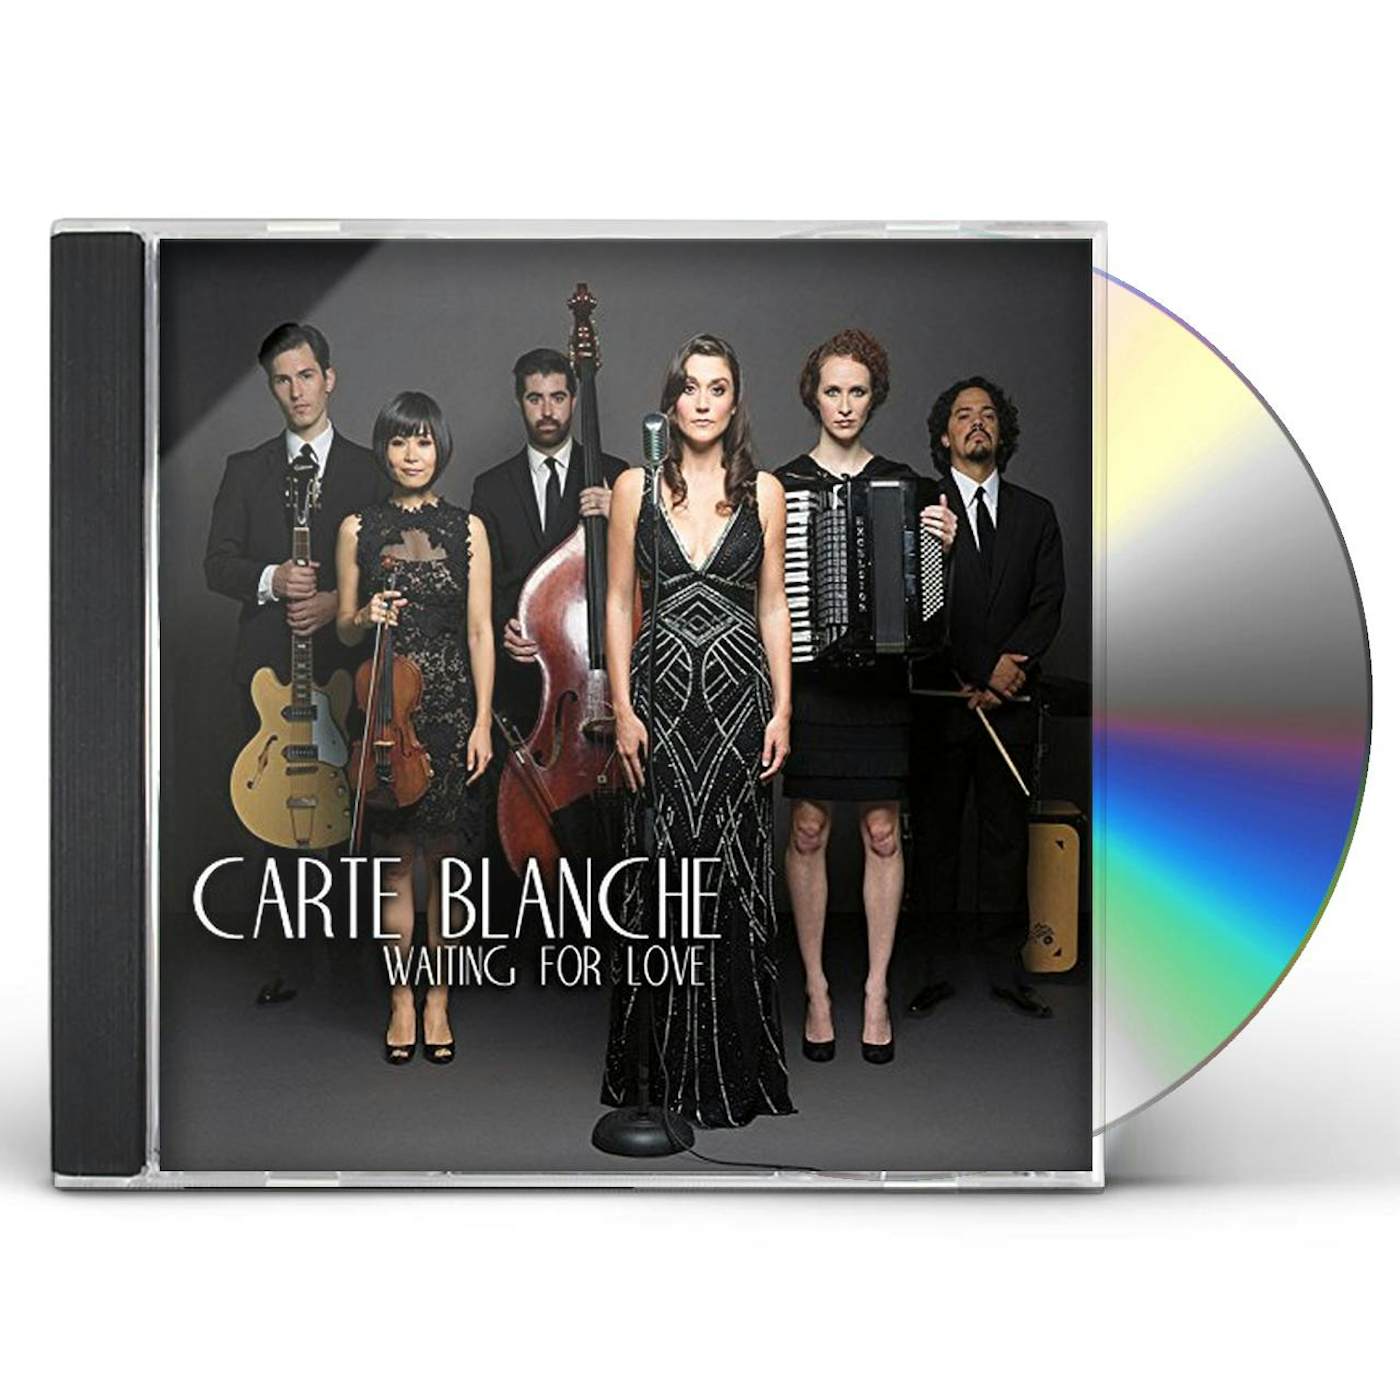 Carte Blanche WAITING FOR LOVE CD